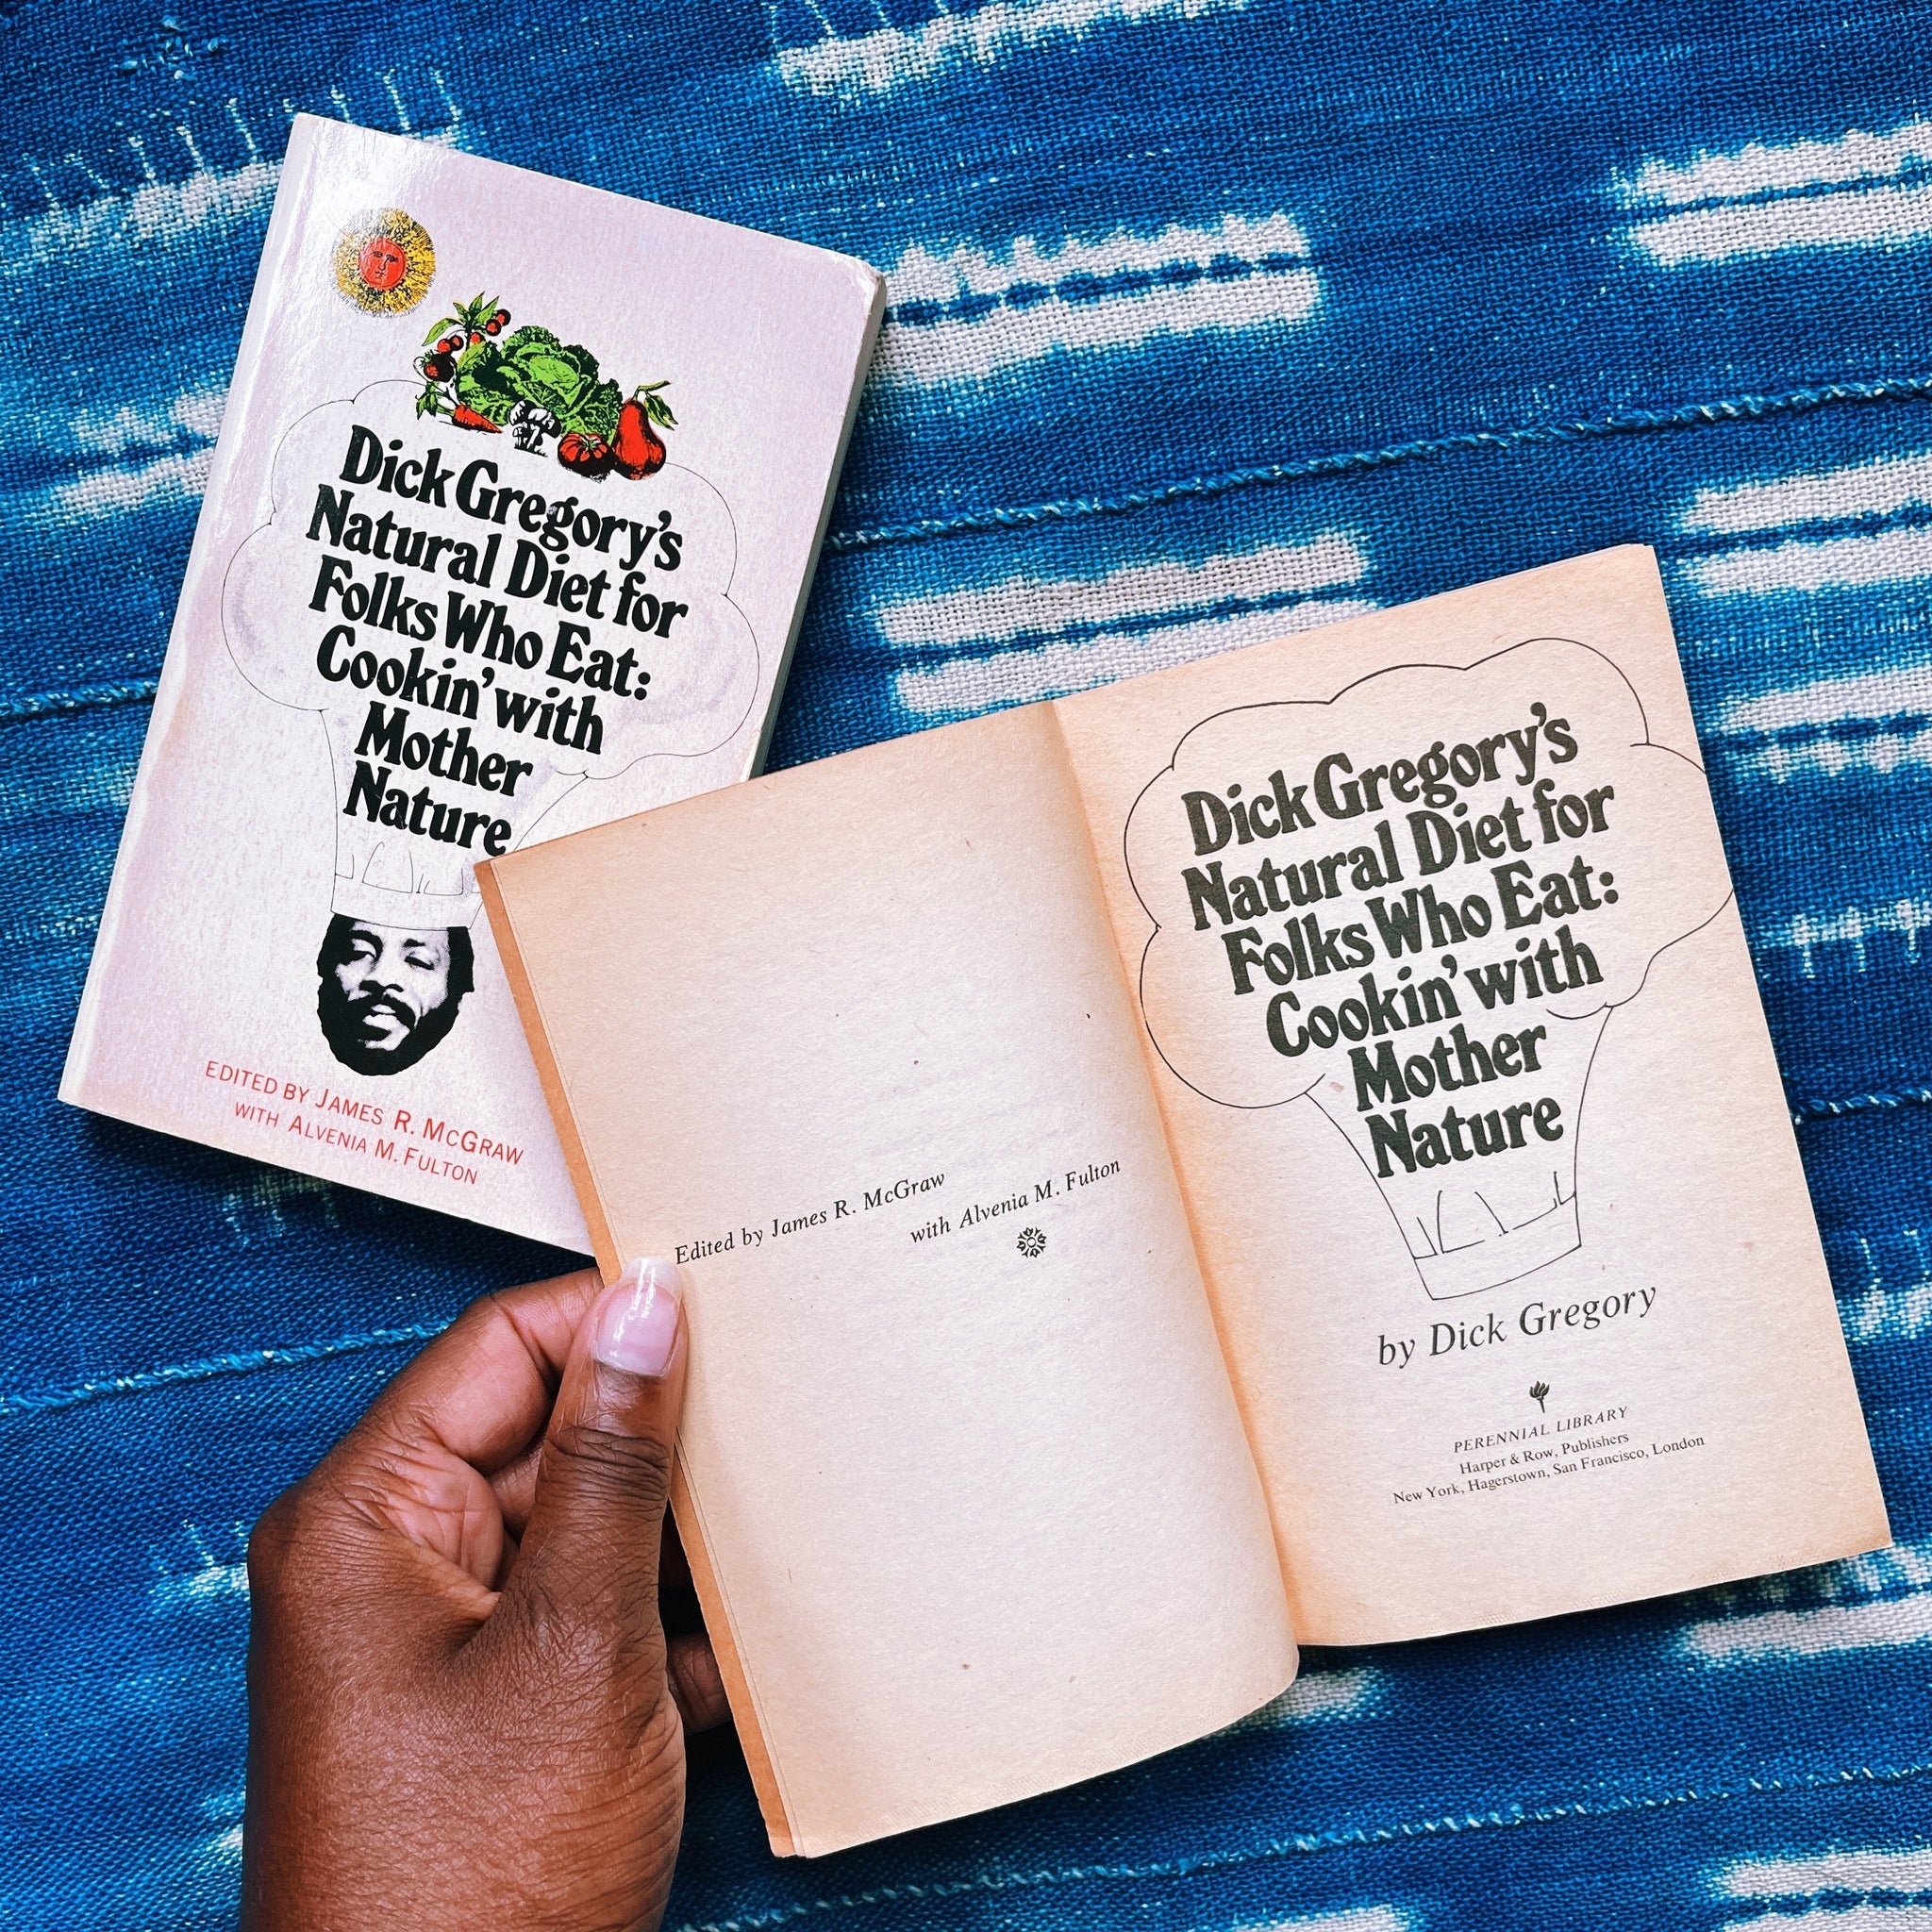 Vintage "Dick Gregory's Natural Cookbook for Folks Who Eat: Cookin' W/ Mother Nature" (First Edition, 1974)